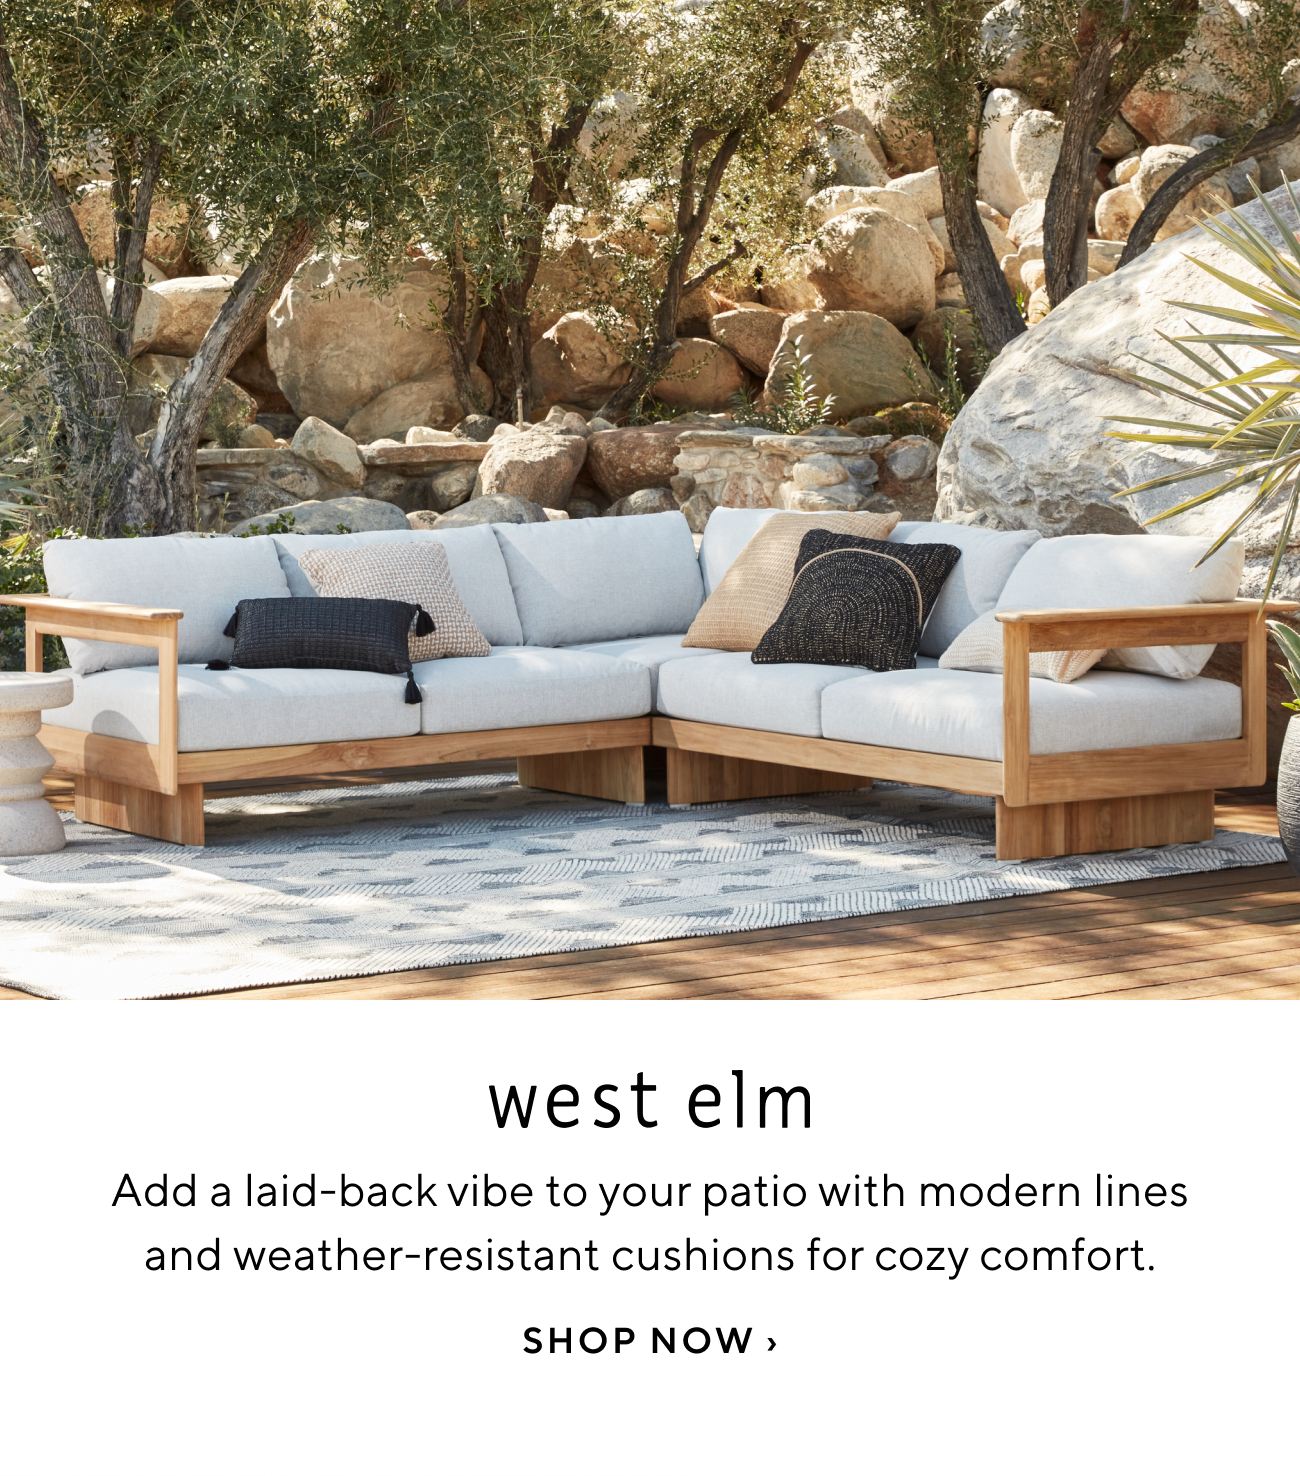  west elm Add a laid-back vibe to your patio with modern lines and weather-resistant cushions for cozy comfort. SHOP NOW 